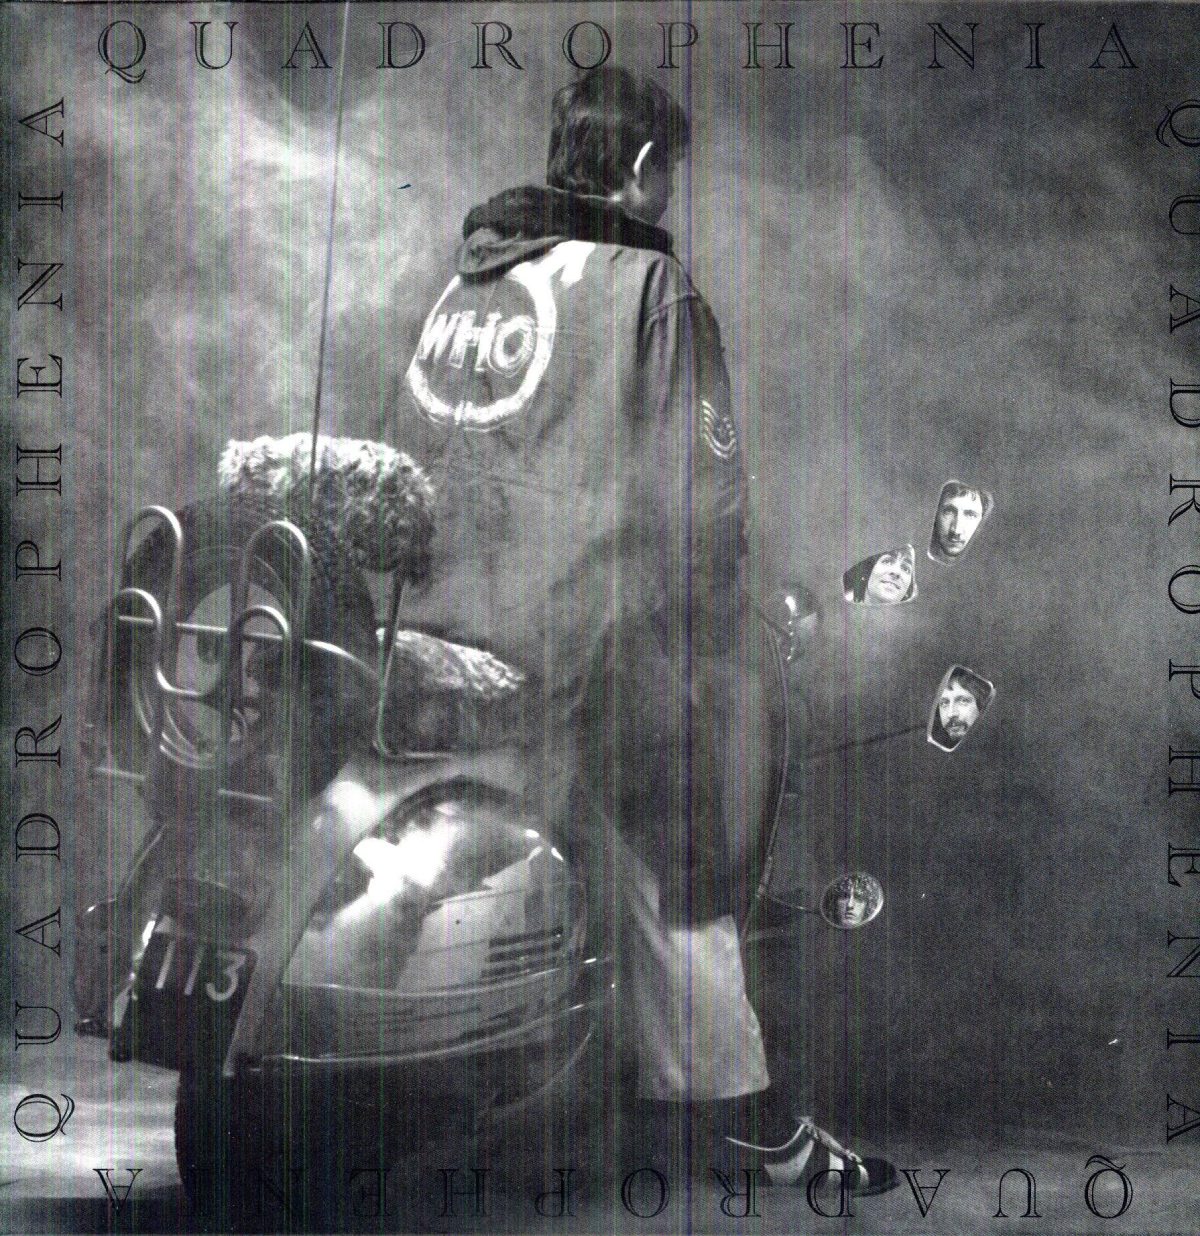 Cover of the album "Quadrophenia" by The Who